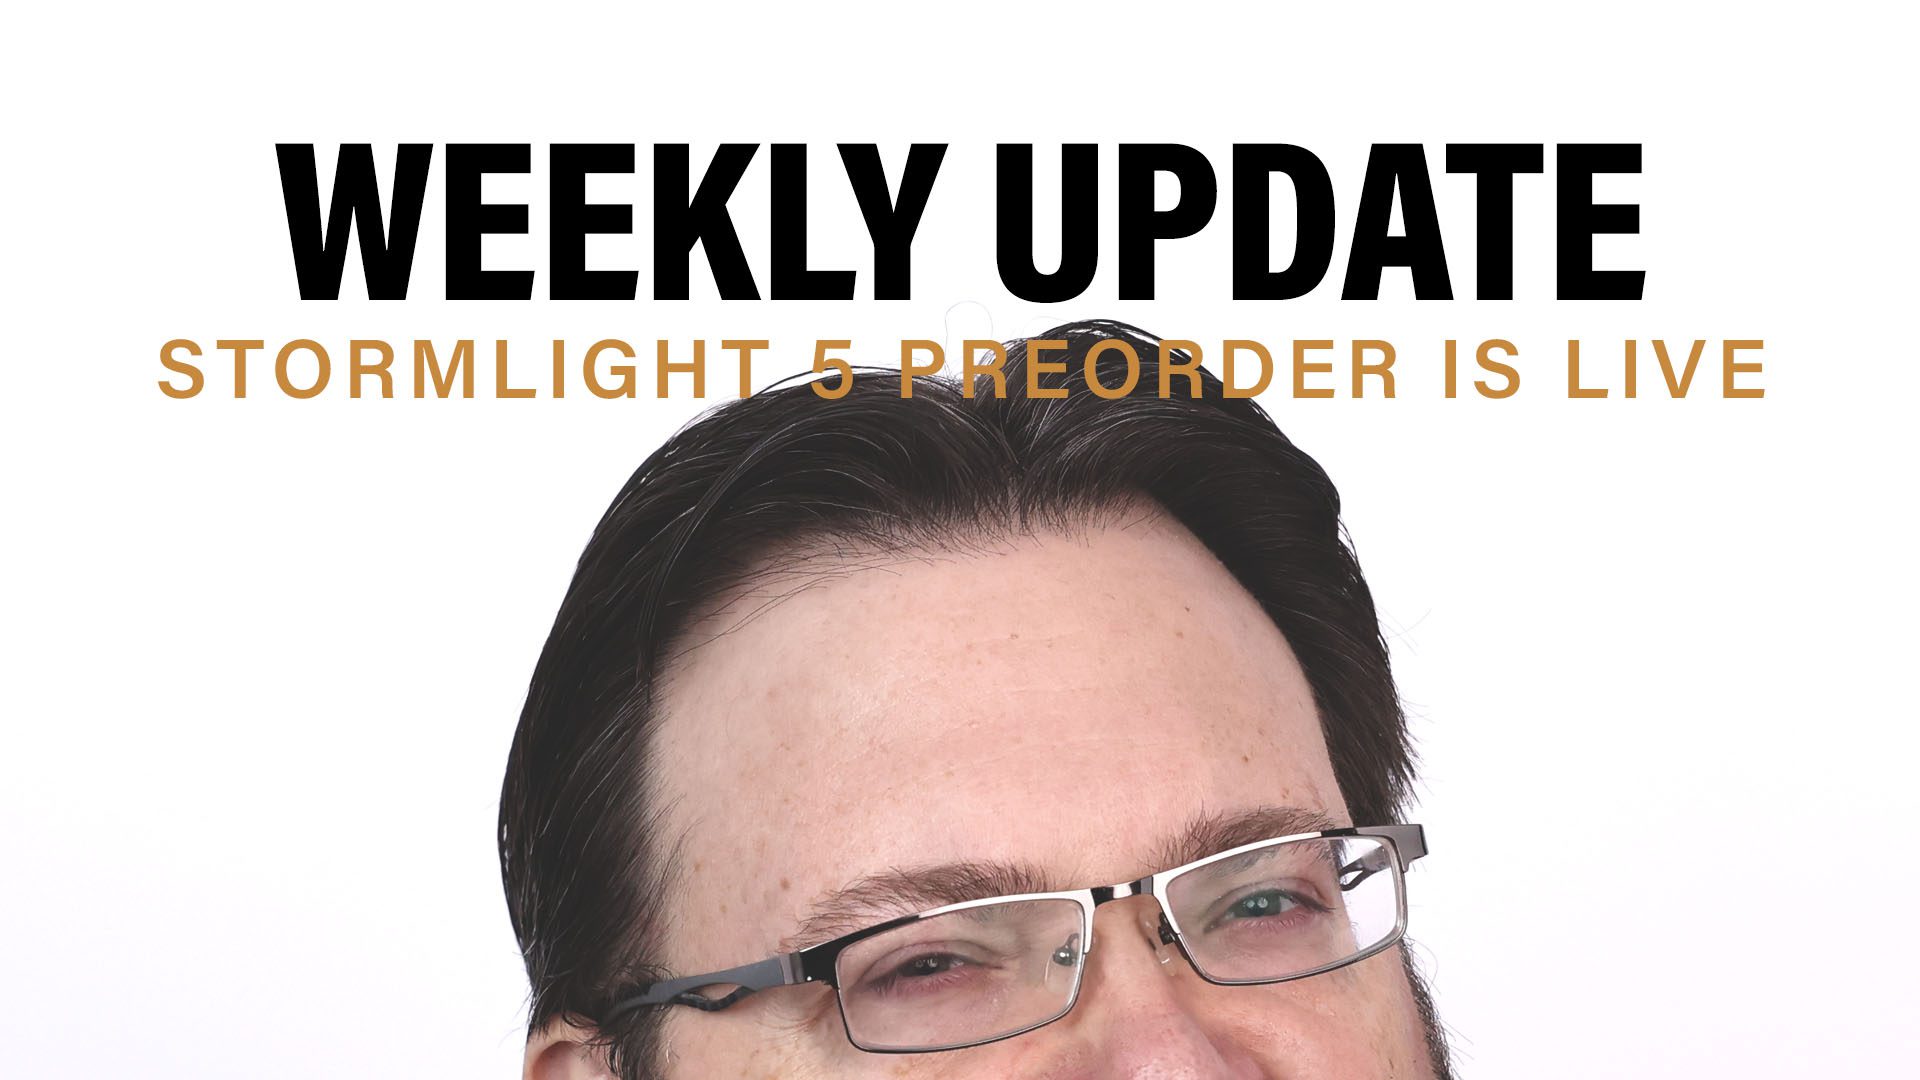 Weekly Update Stormlight five pre-order is live